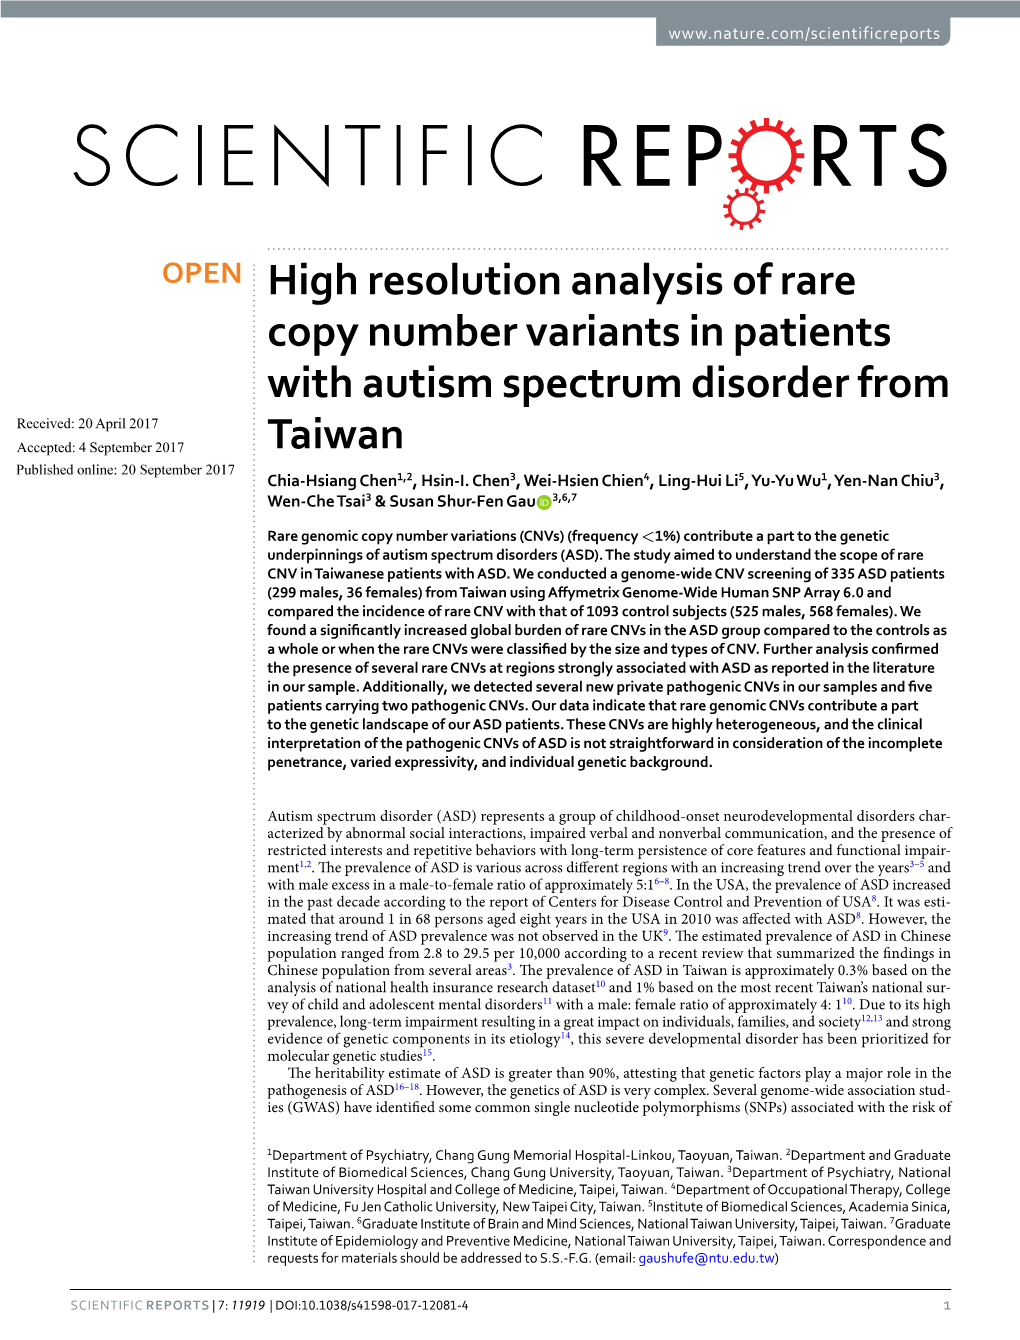 High Resolution Analysis of Rare Copy Number Variants in Patients With